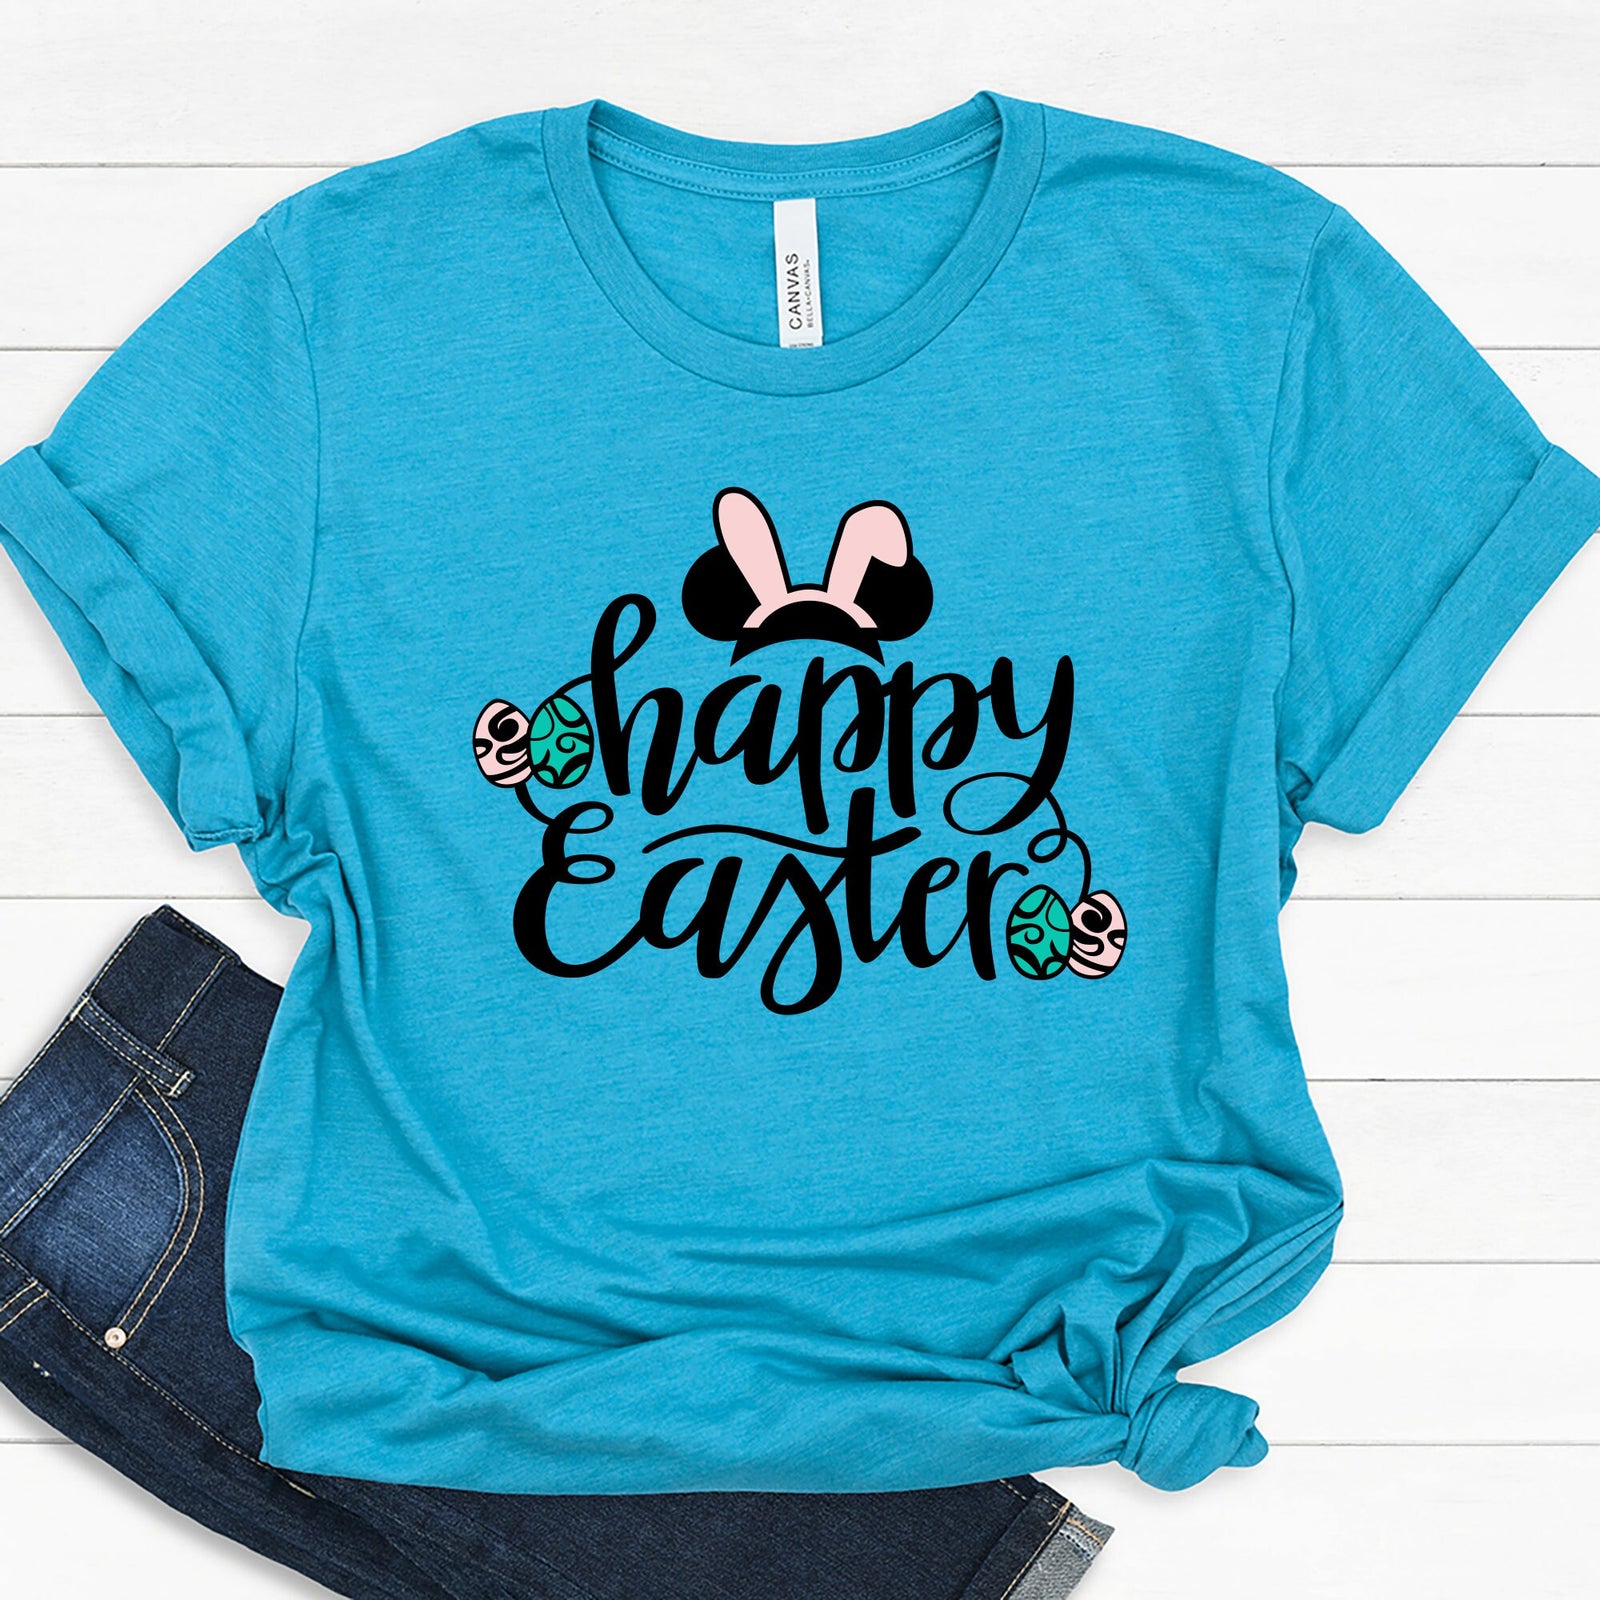 Happy Easter Mouse Ears Adult T Shirt- Disney Friends Family Matching Shirts - Bunny Ears